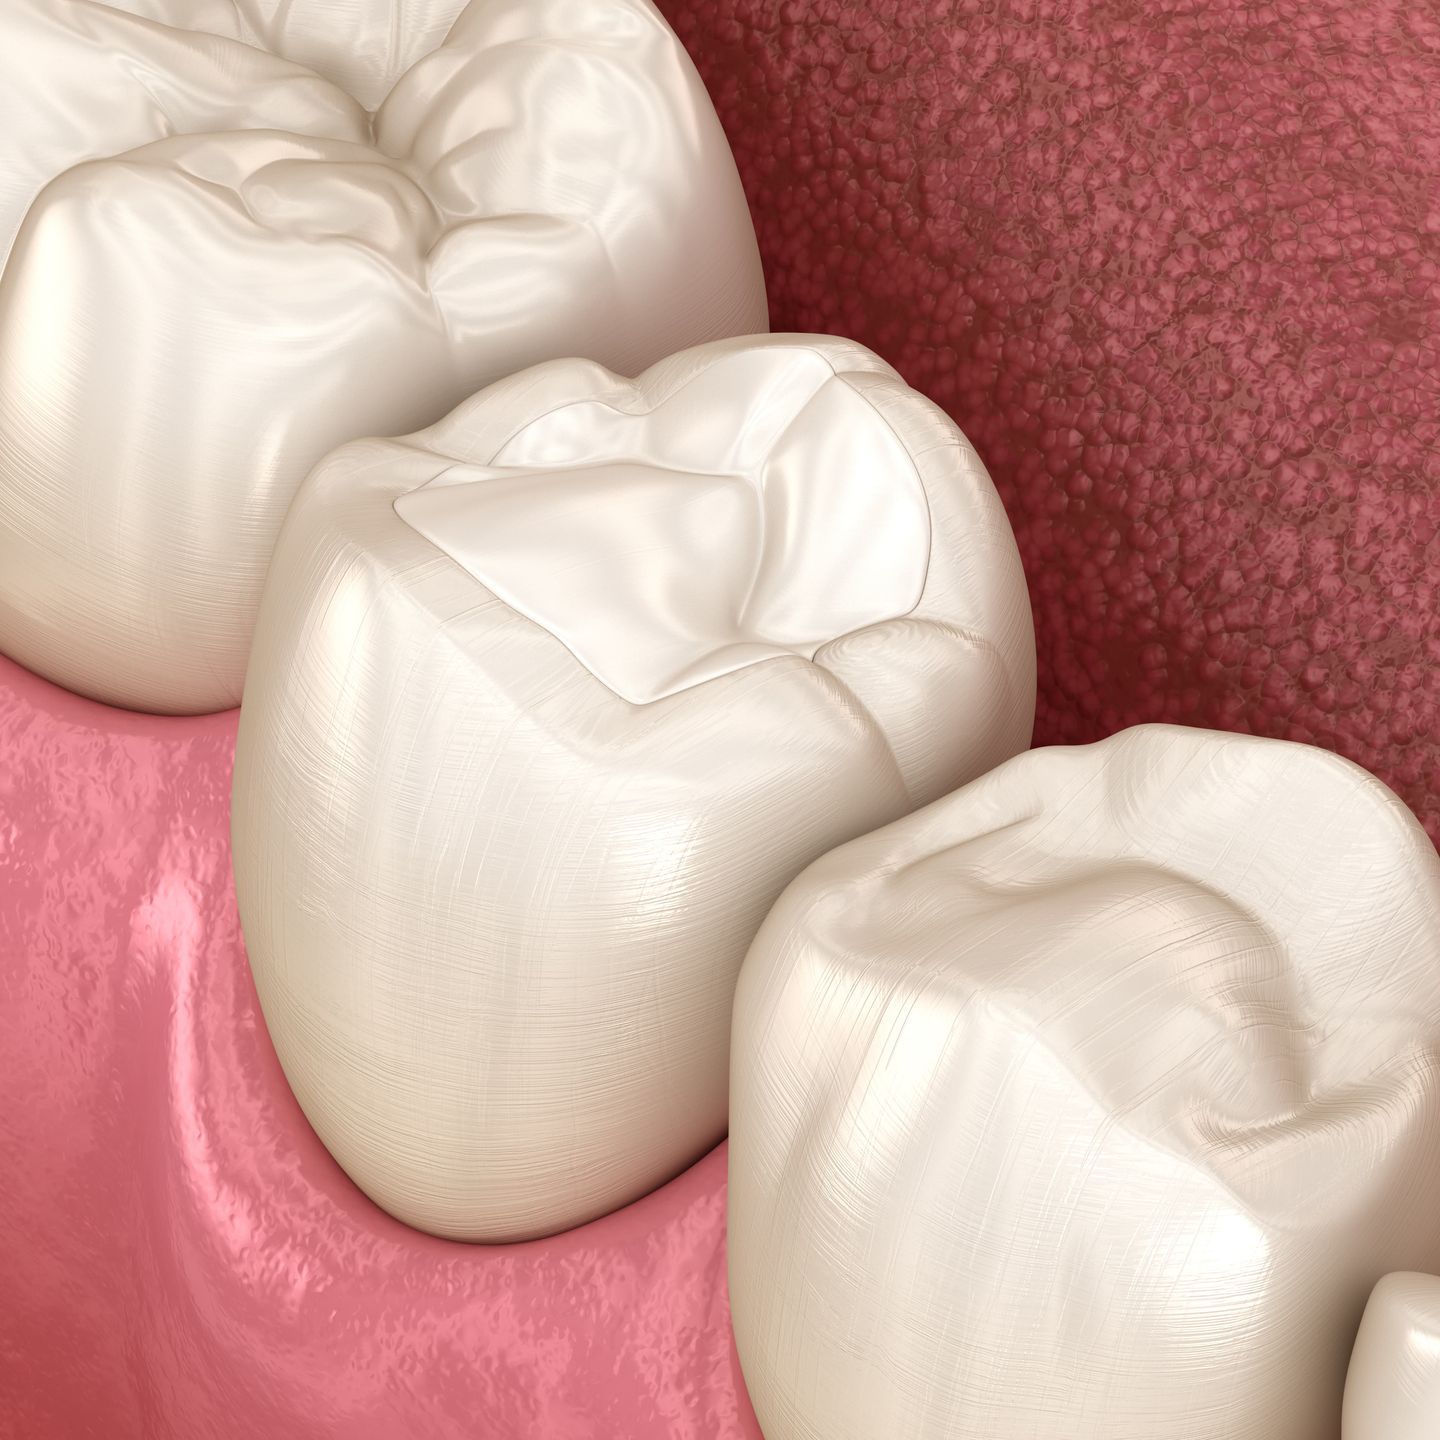 A computer generated image of a tooth filled with a composite filling